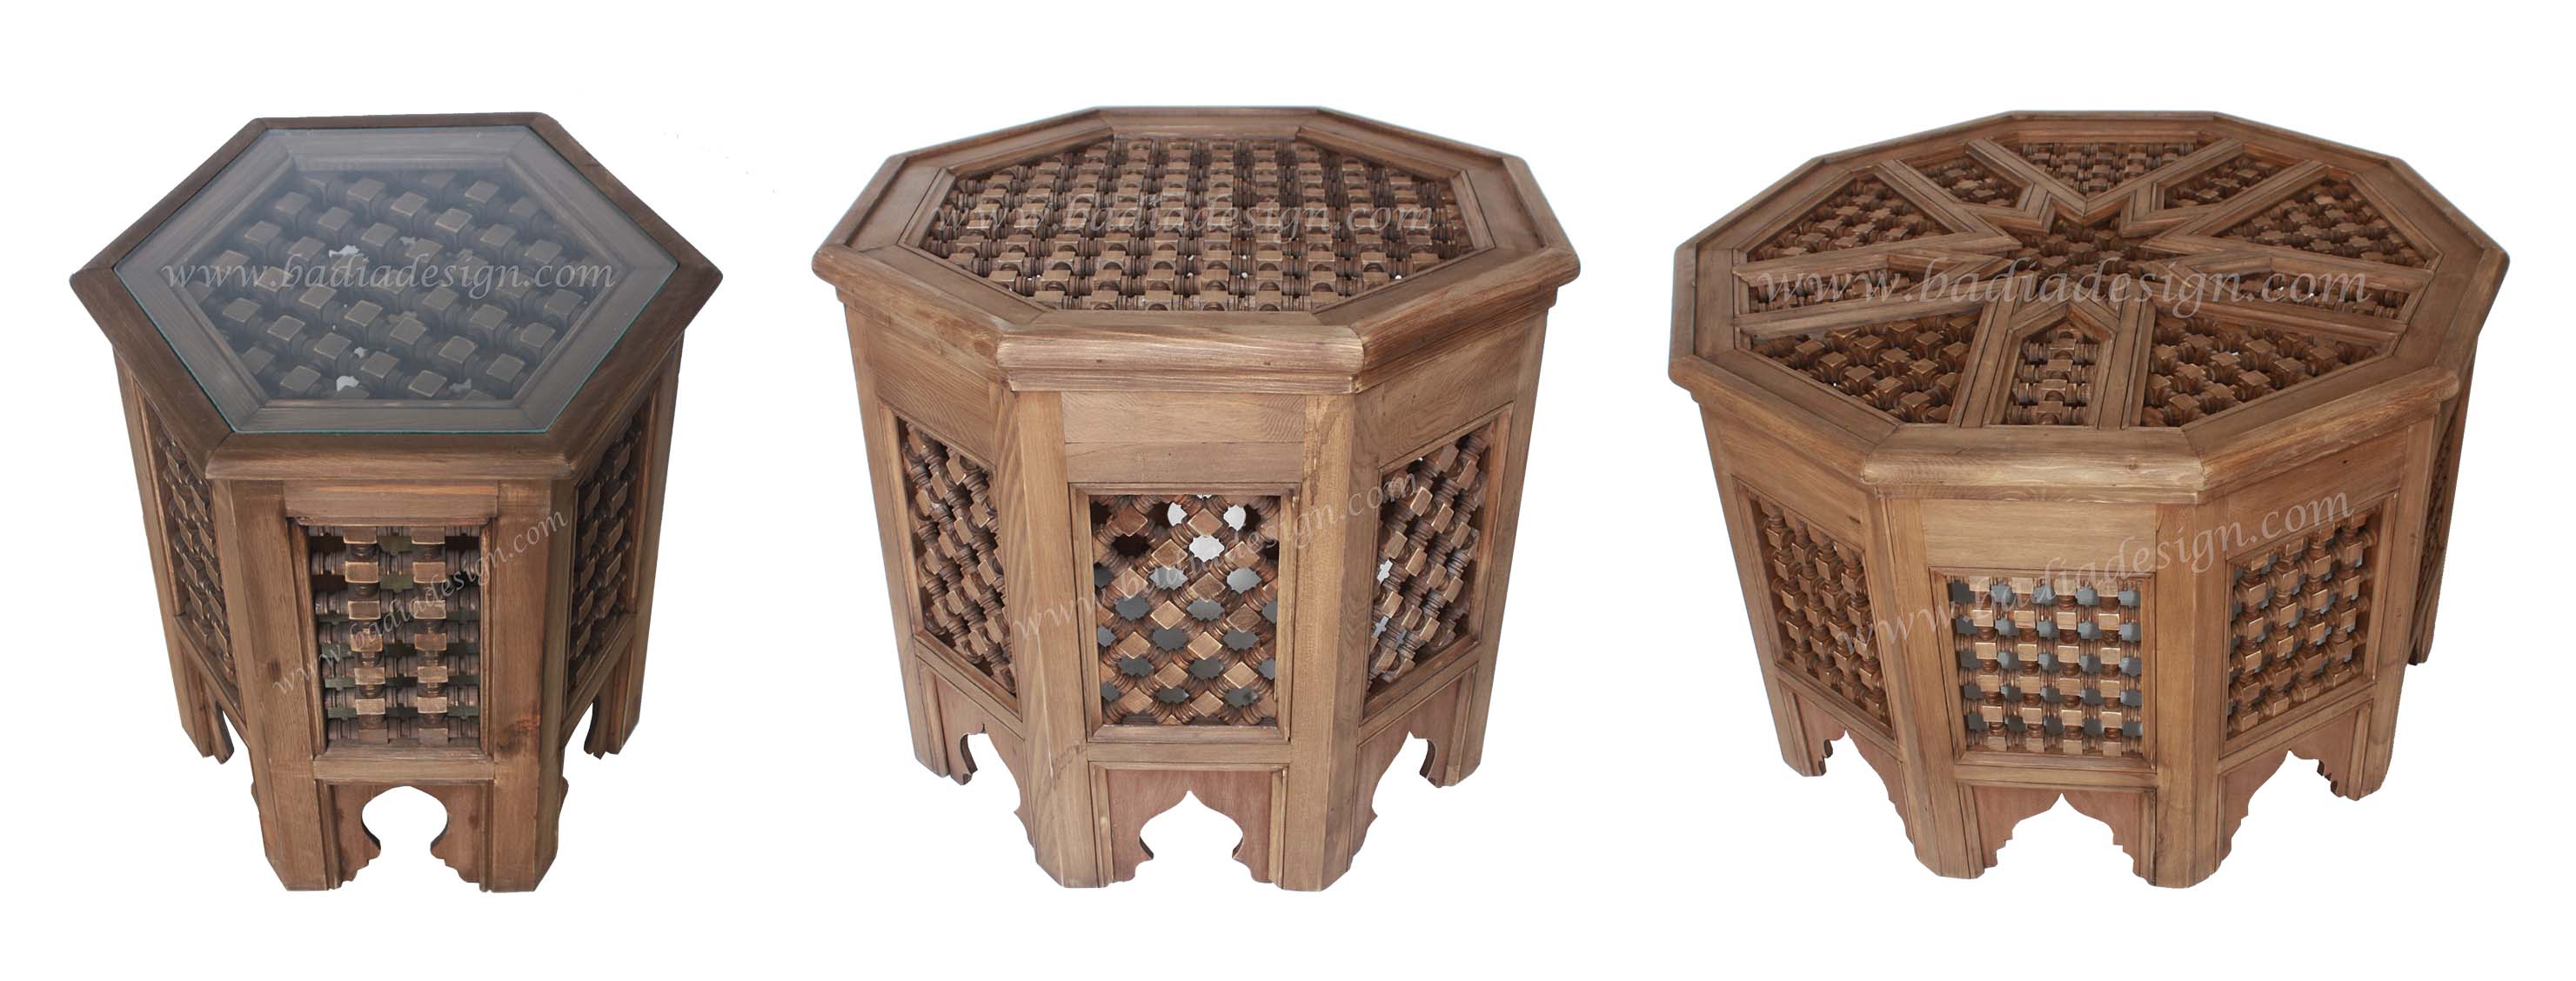 moroccan-wooden-coffee-table-cw-st010.jpg